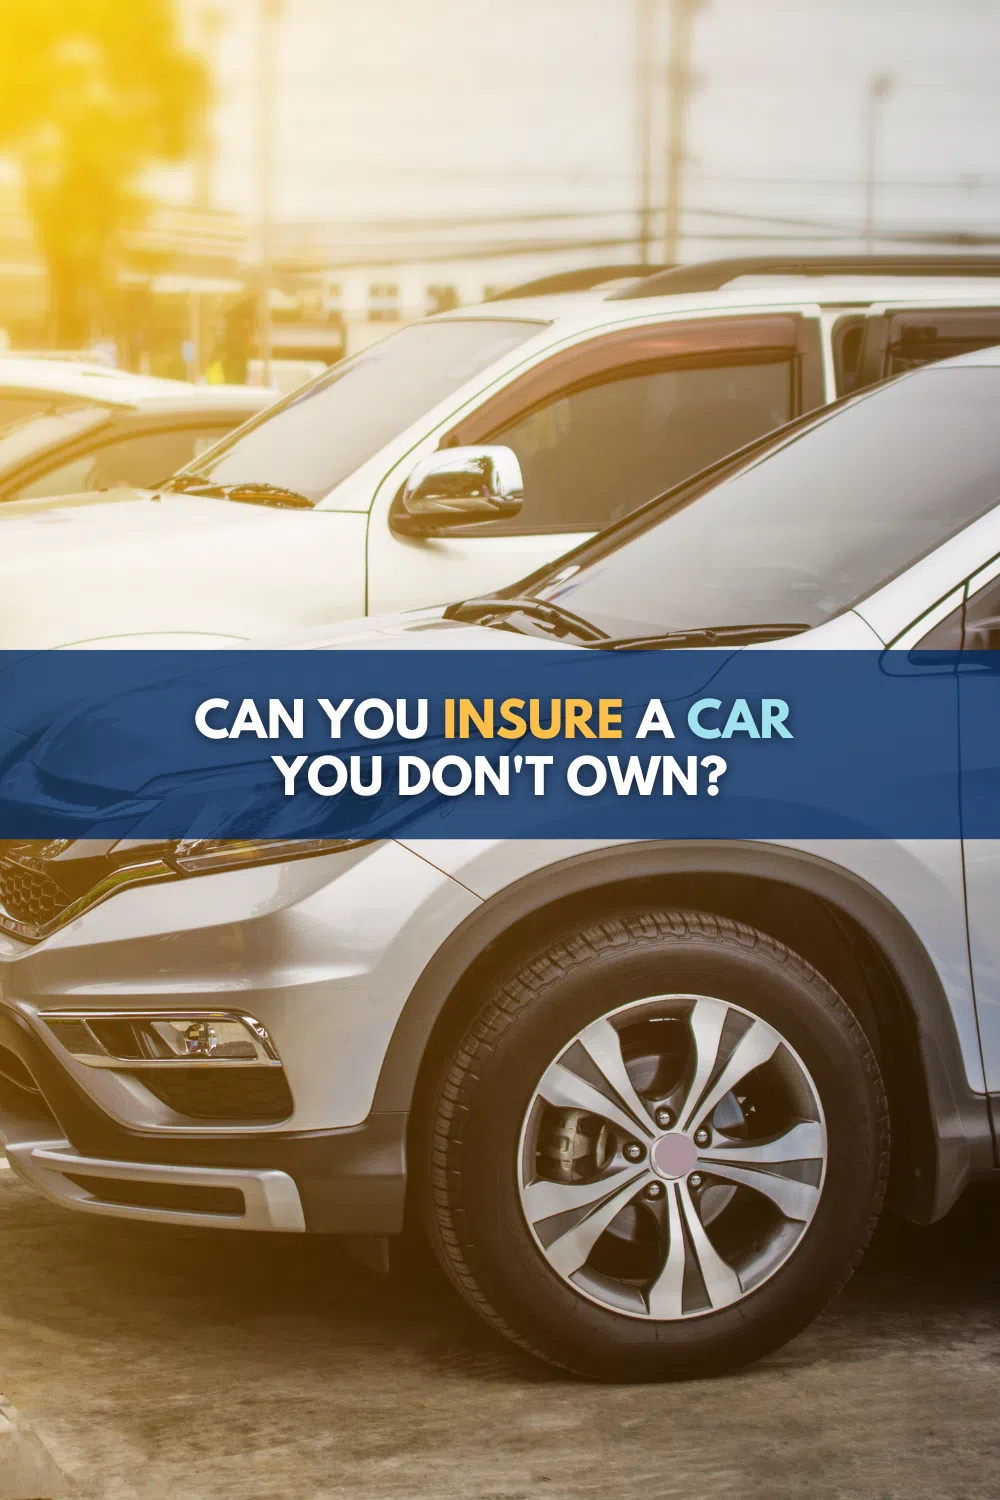 Can You Insure A Car You Don’t Own?